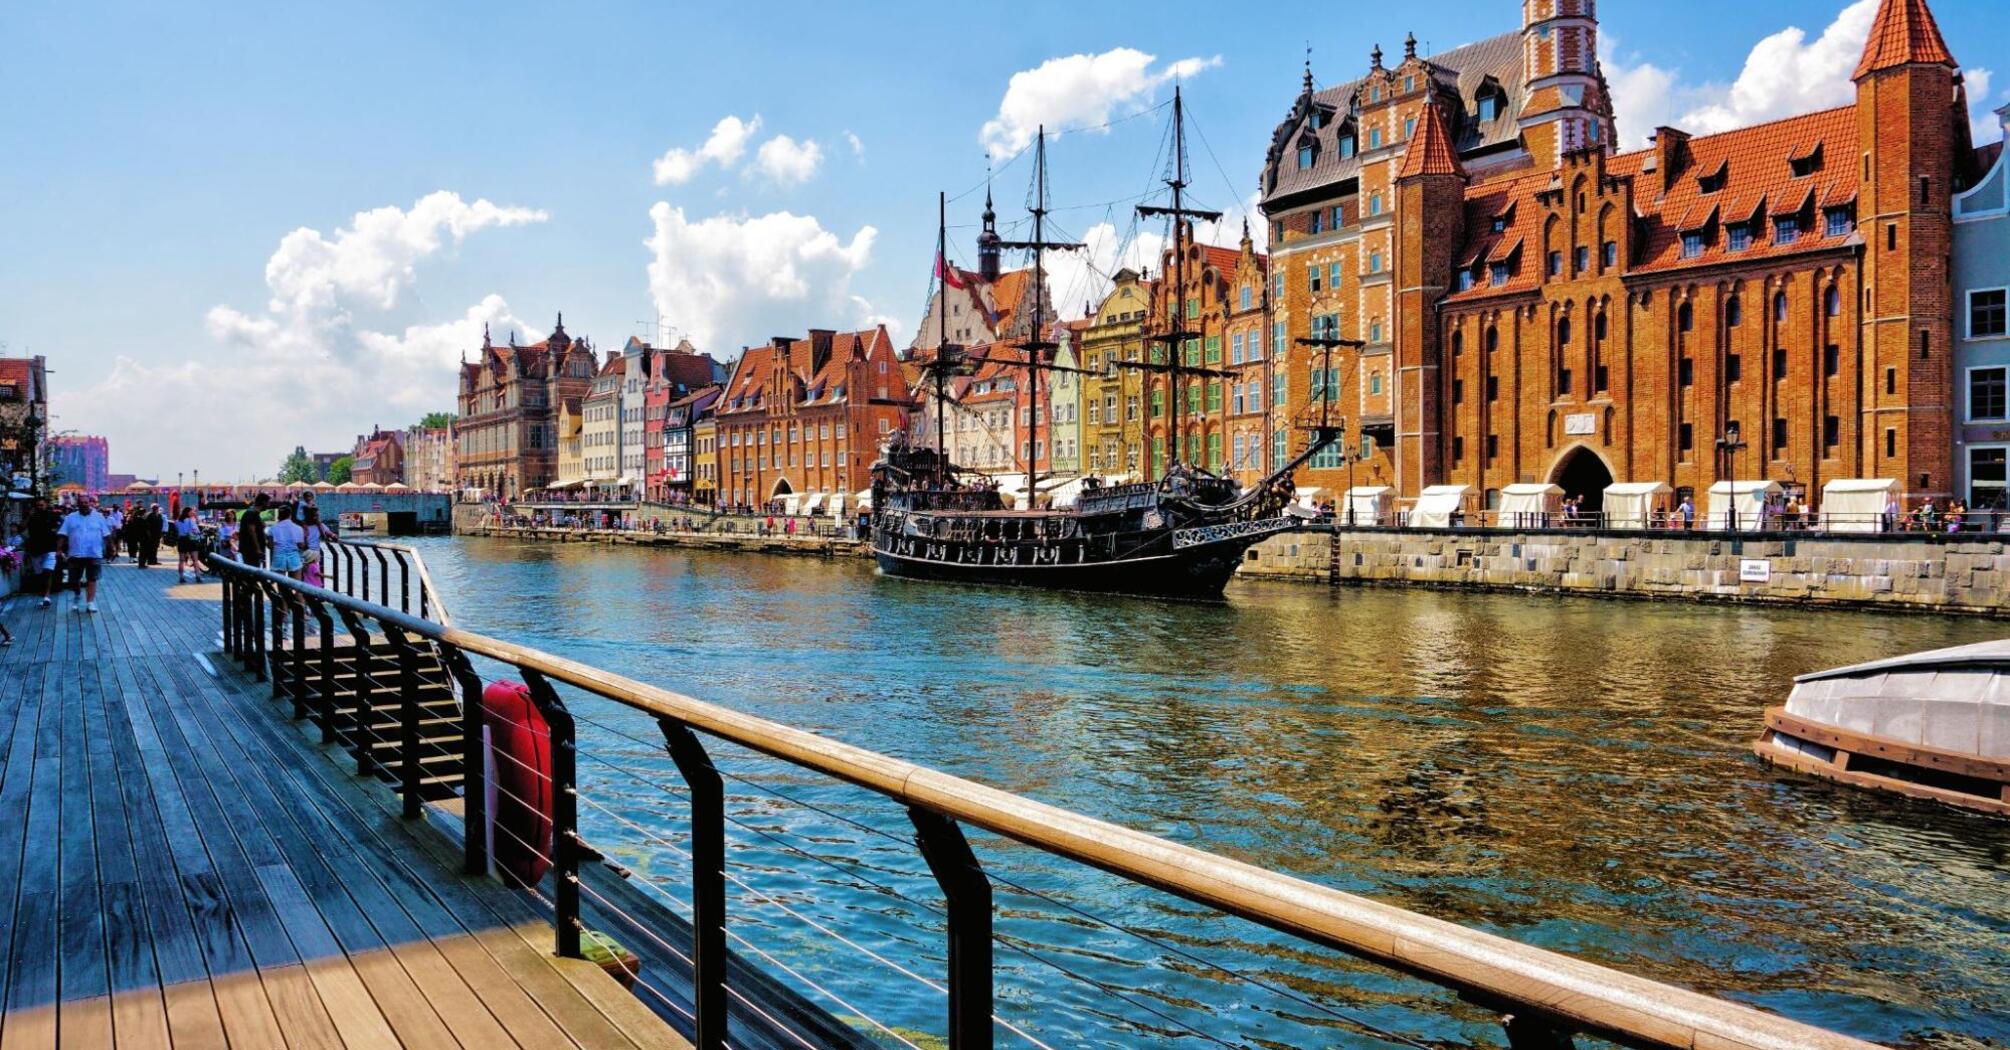 The old port in the city center of Gdansk